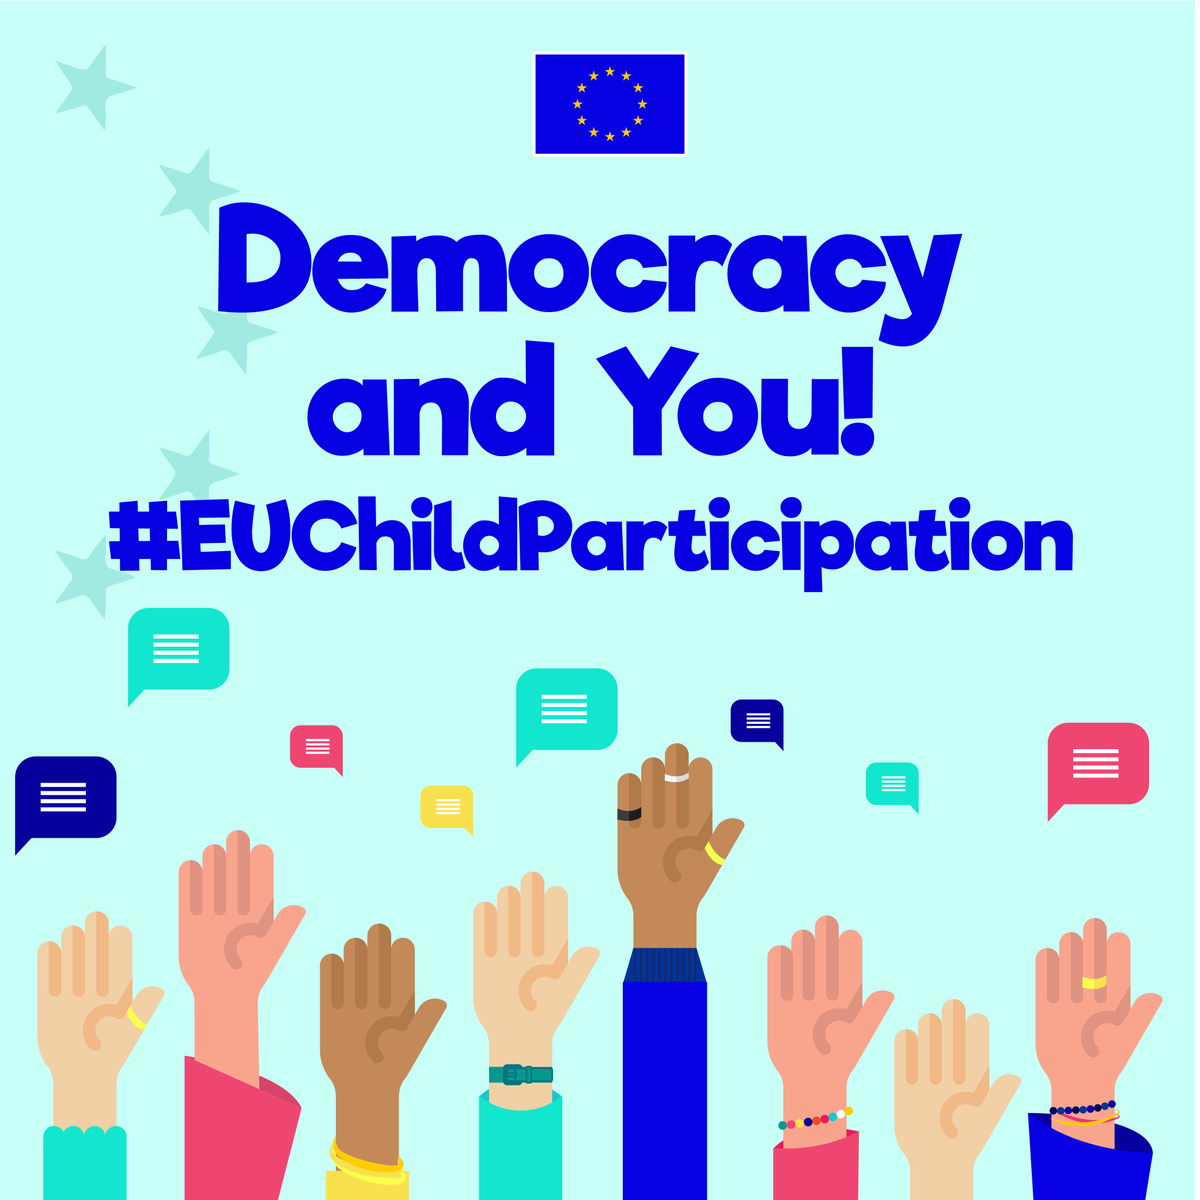 Do you work with young people under 18 who have an interest in #democracy? 📣 @DCEDIY wants to hear from YOUTH about democratic participation. What's working well? What changes do they want to see? Encourage them to take this survey by 18th April 👉 bit.ly/3TEfESJ